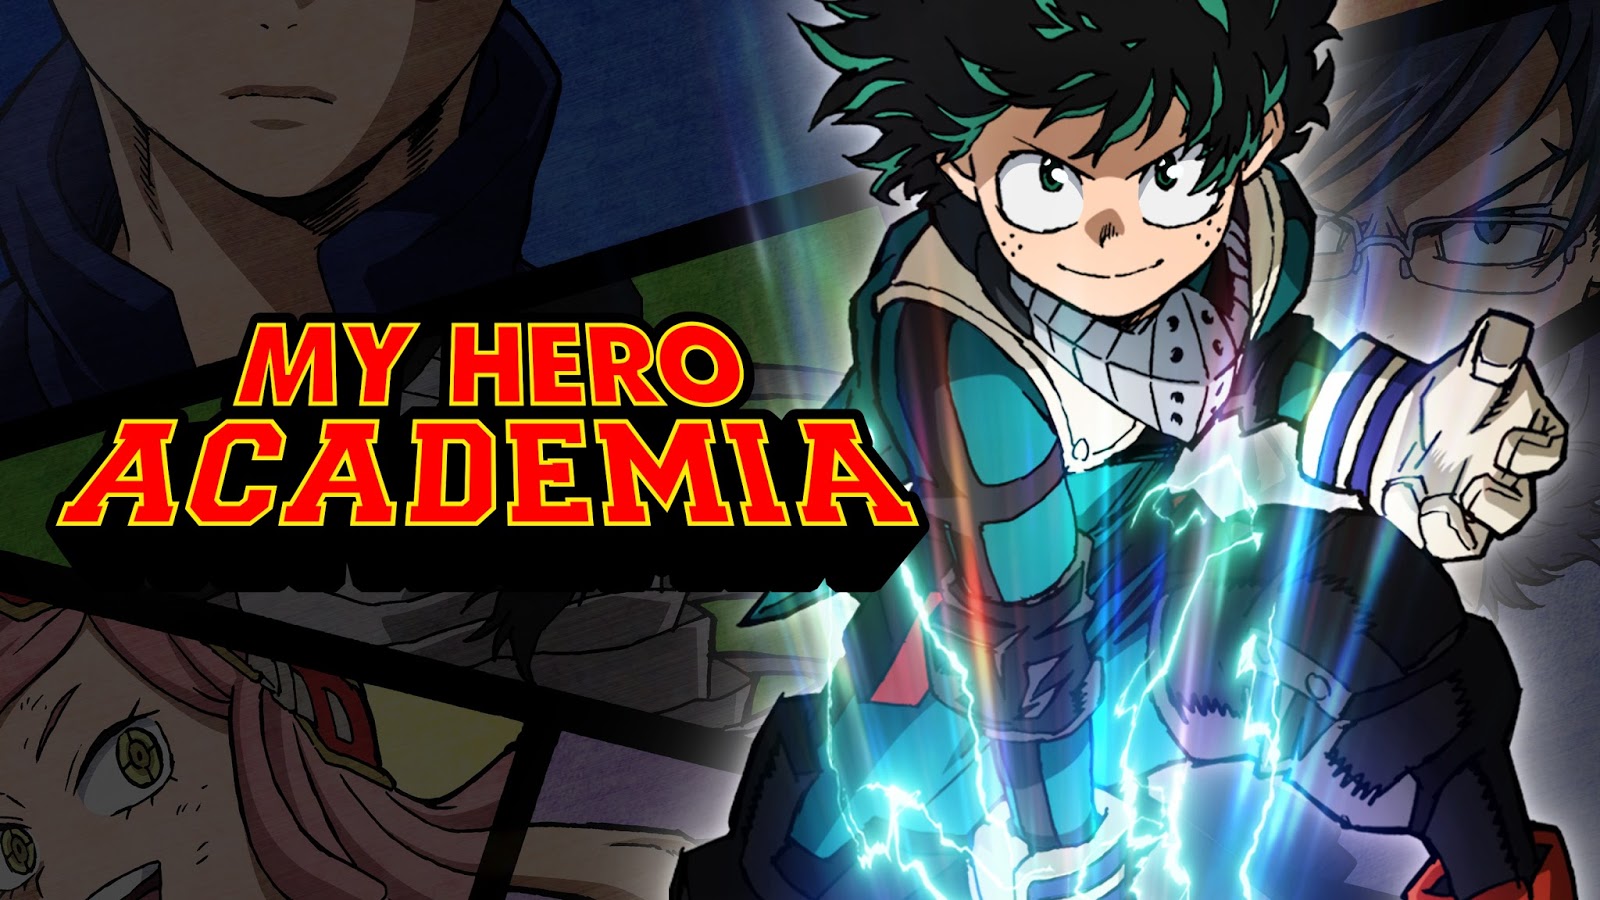 gaming-rocks-on-let-s-discuss-my-hero-academia-part-2